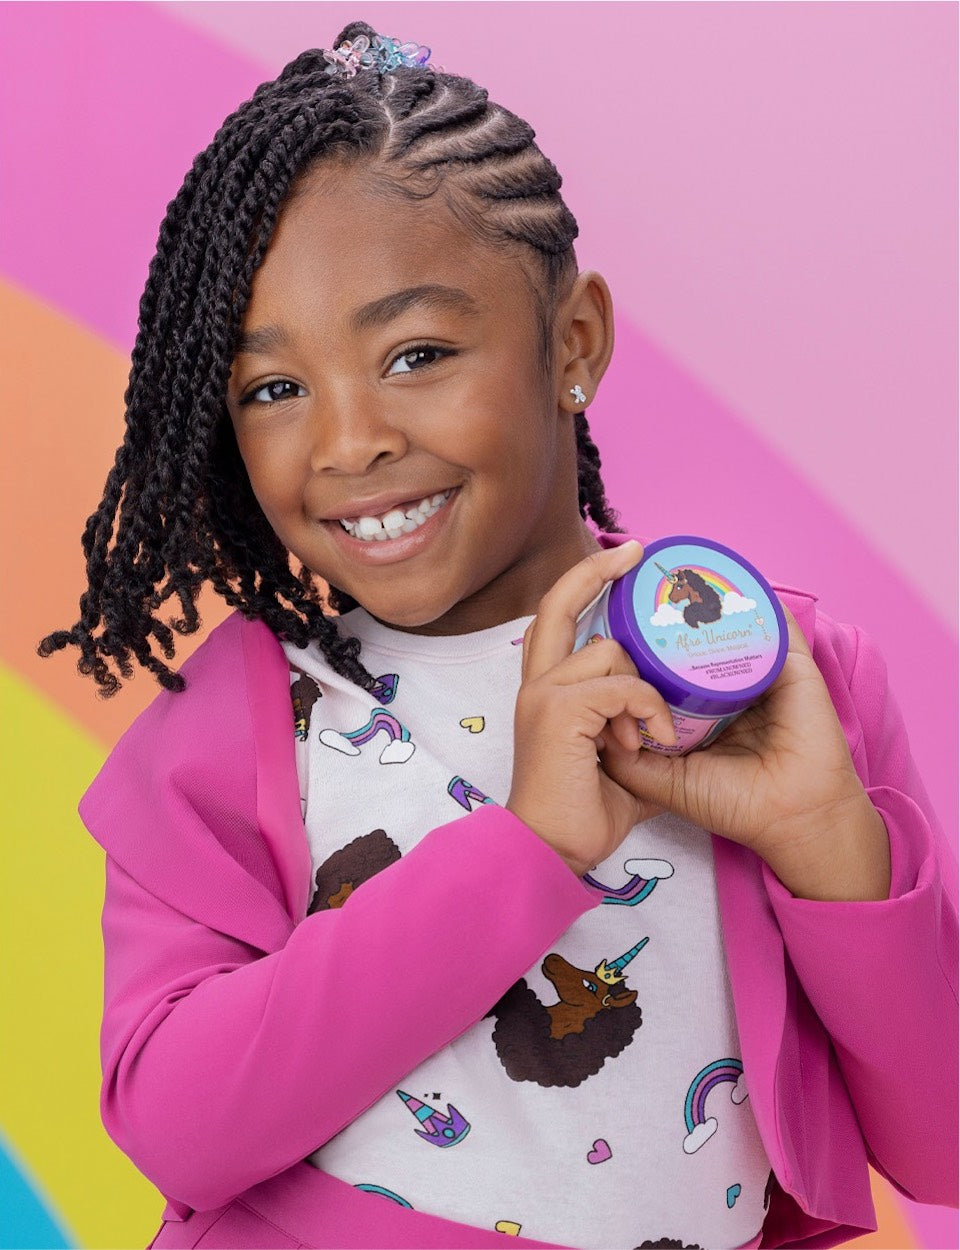 A model smiling while holding an Afro Unicorn jar.